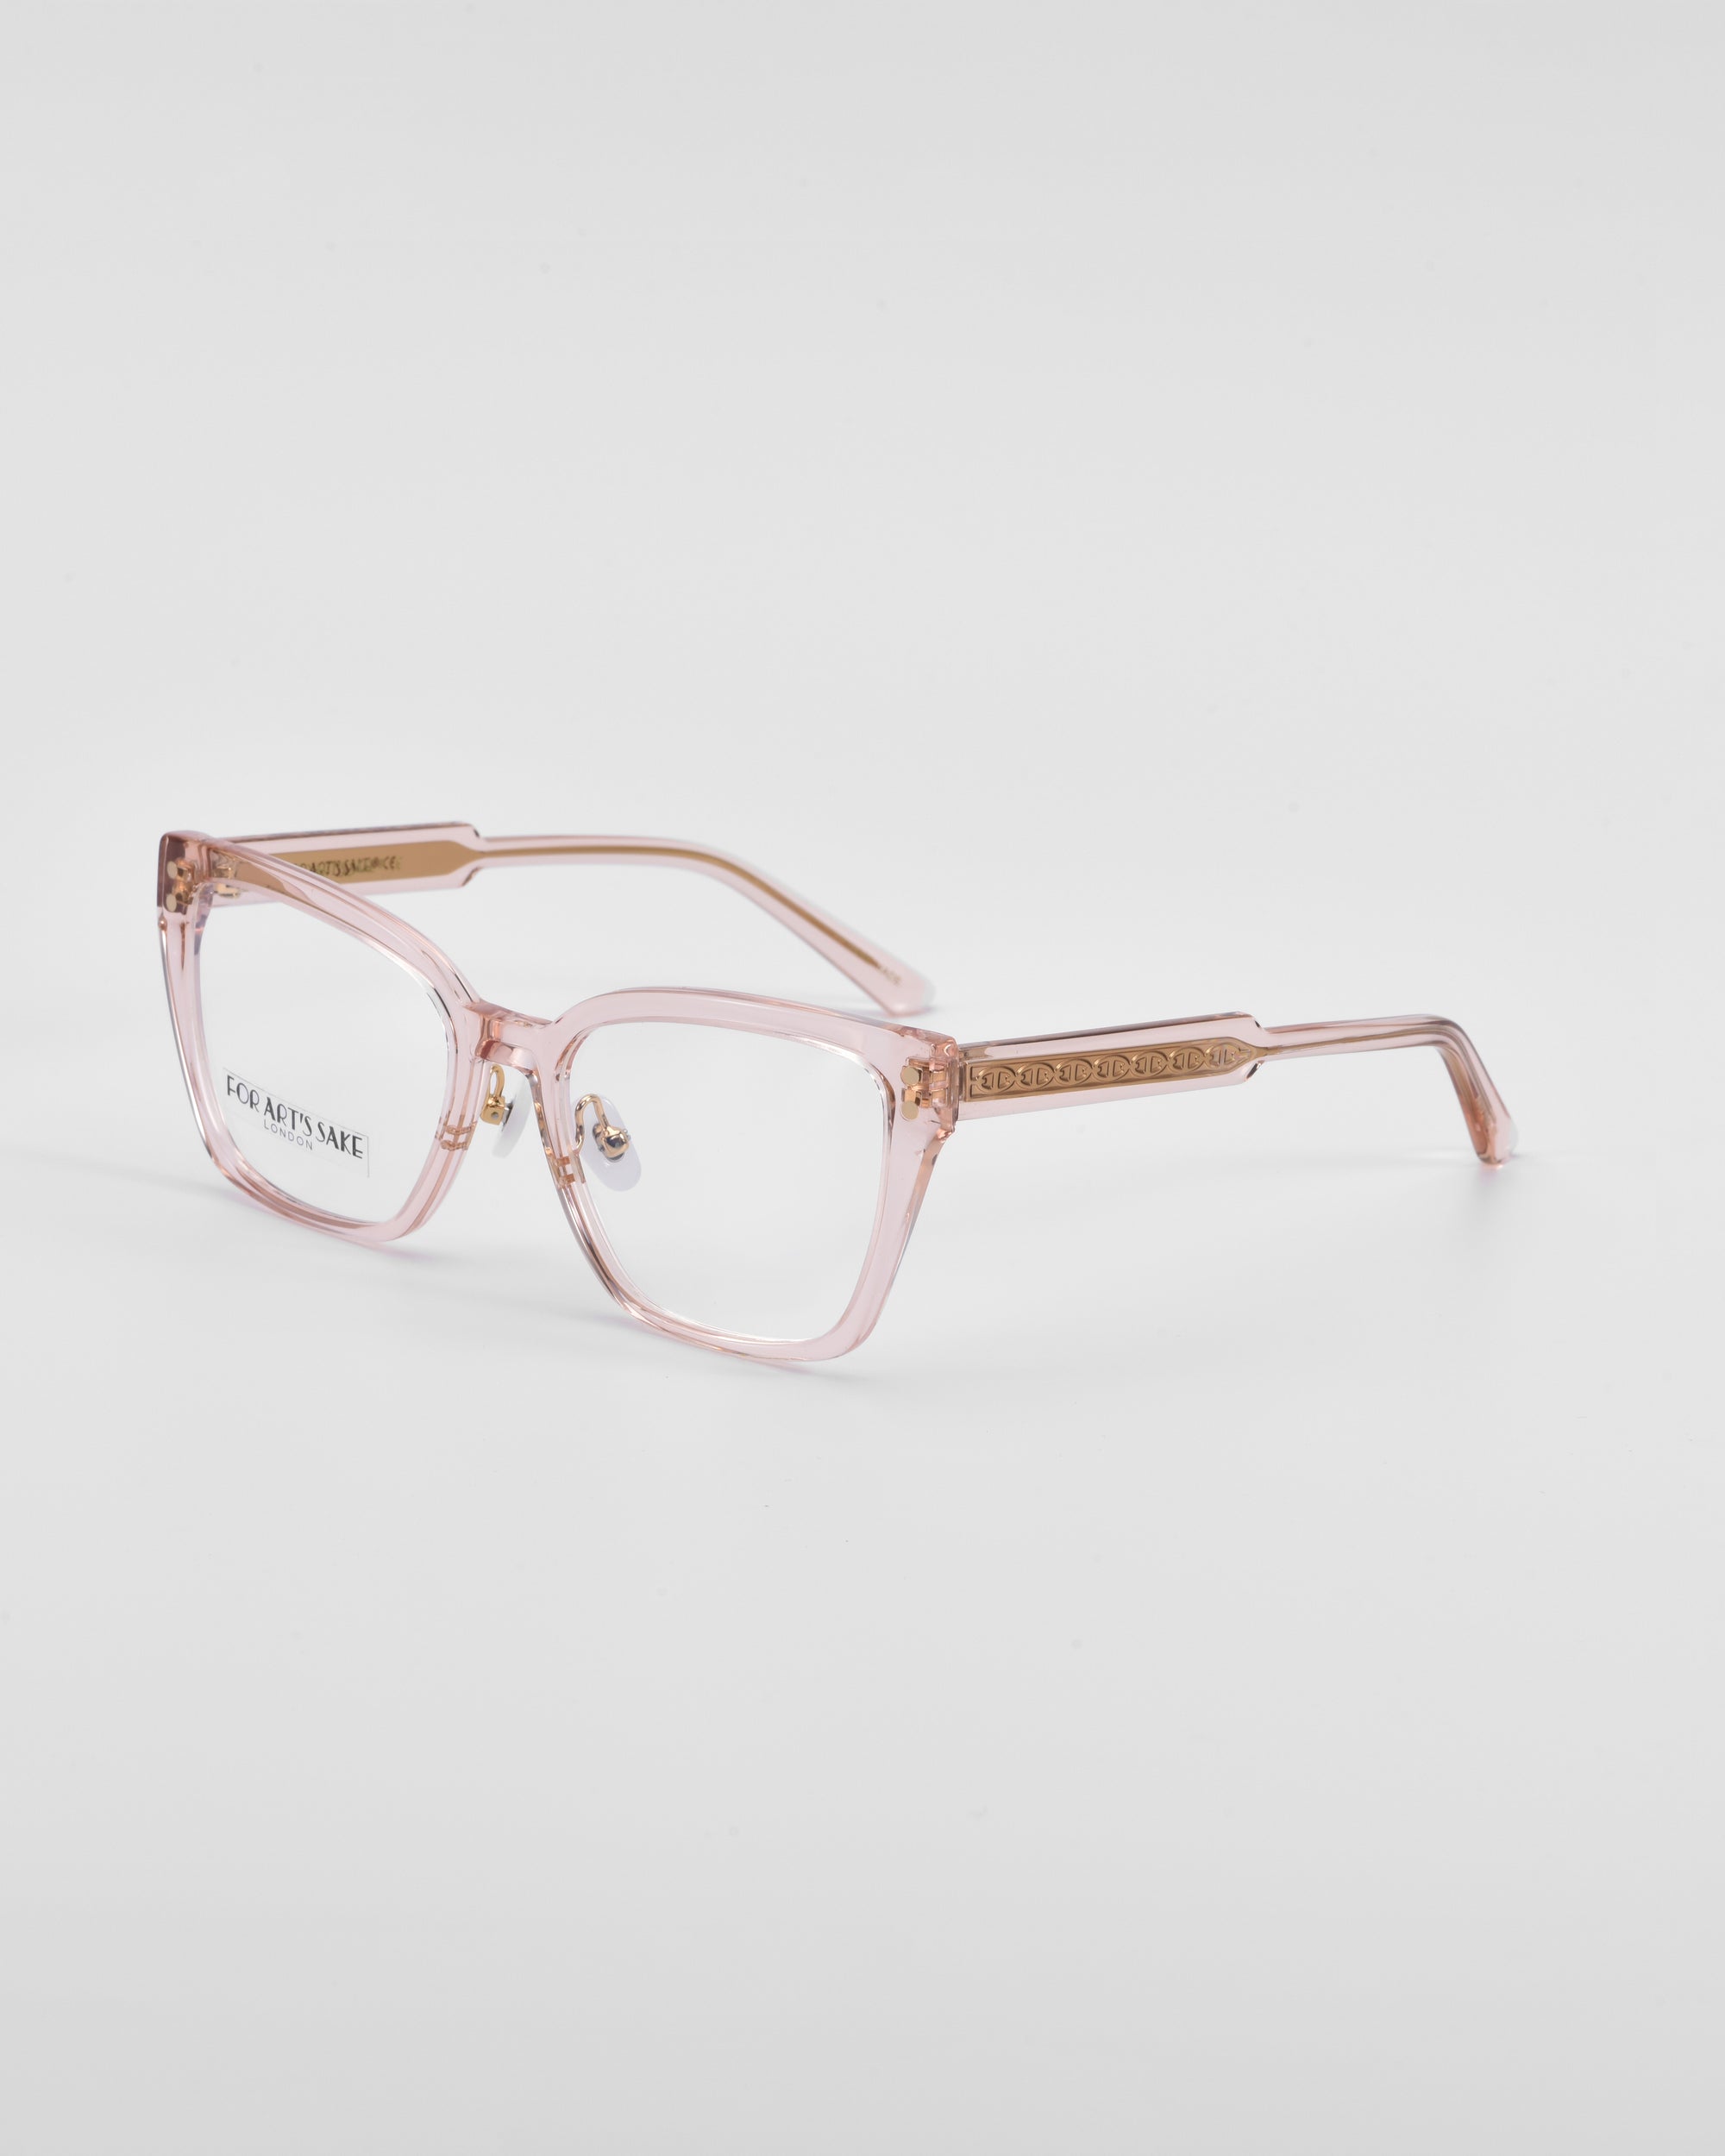 A pair of transparent pink Abbey glasses by For Art&#39;s Sake® with subtle golden accents on the temples, which feature a delicate link-chain pattern etched into them. The Abbey glasses boast rectangular lenses and a slightly oversized frame design. The background is white.